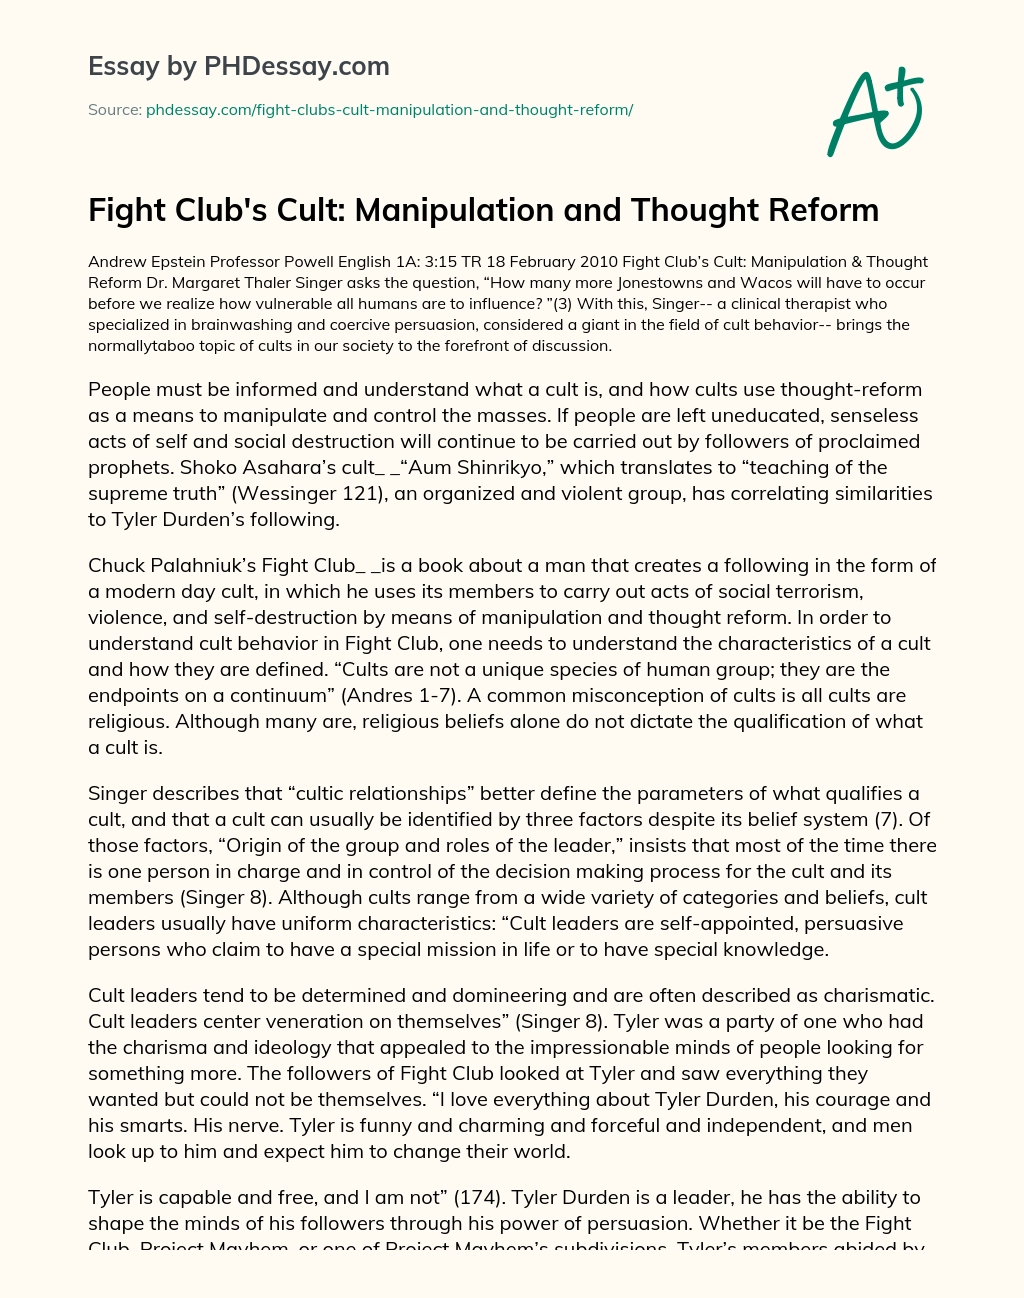 Fight Club’s Cult: Manipulation and Thought Reform essay